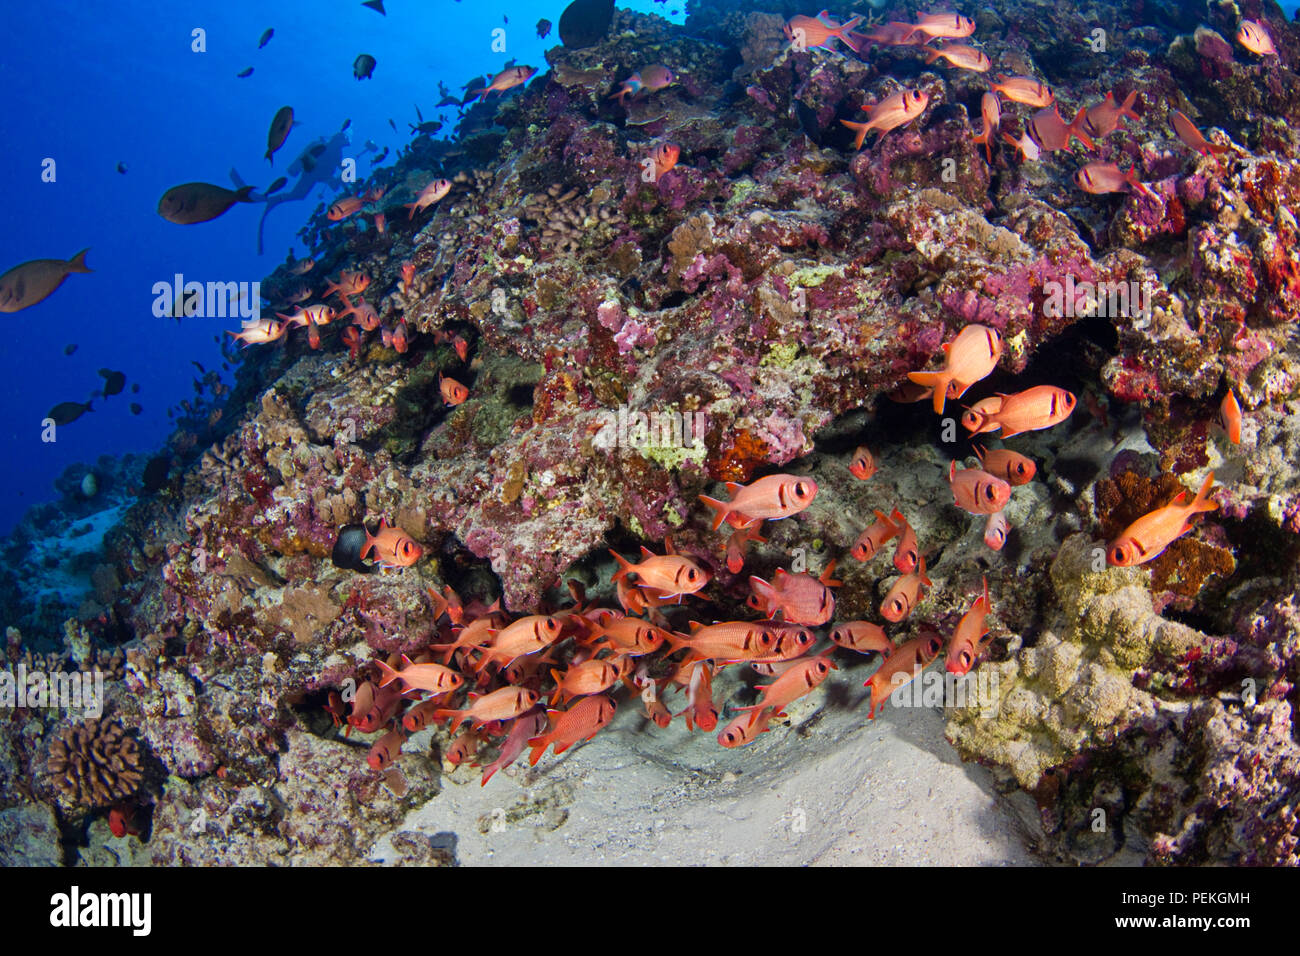 Diver (MR) and a reef scene with a school of shoulderbar soldierfish, Myripristis kuntee.   Hawaii. Stock Photo